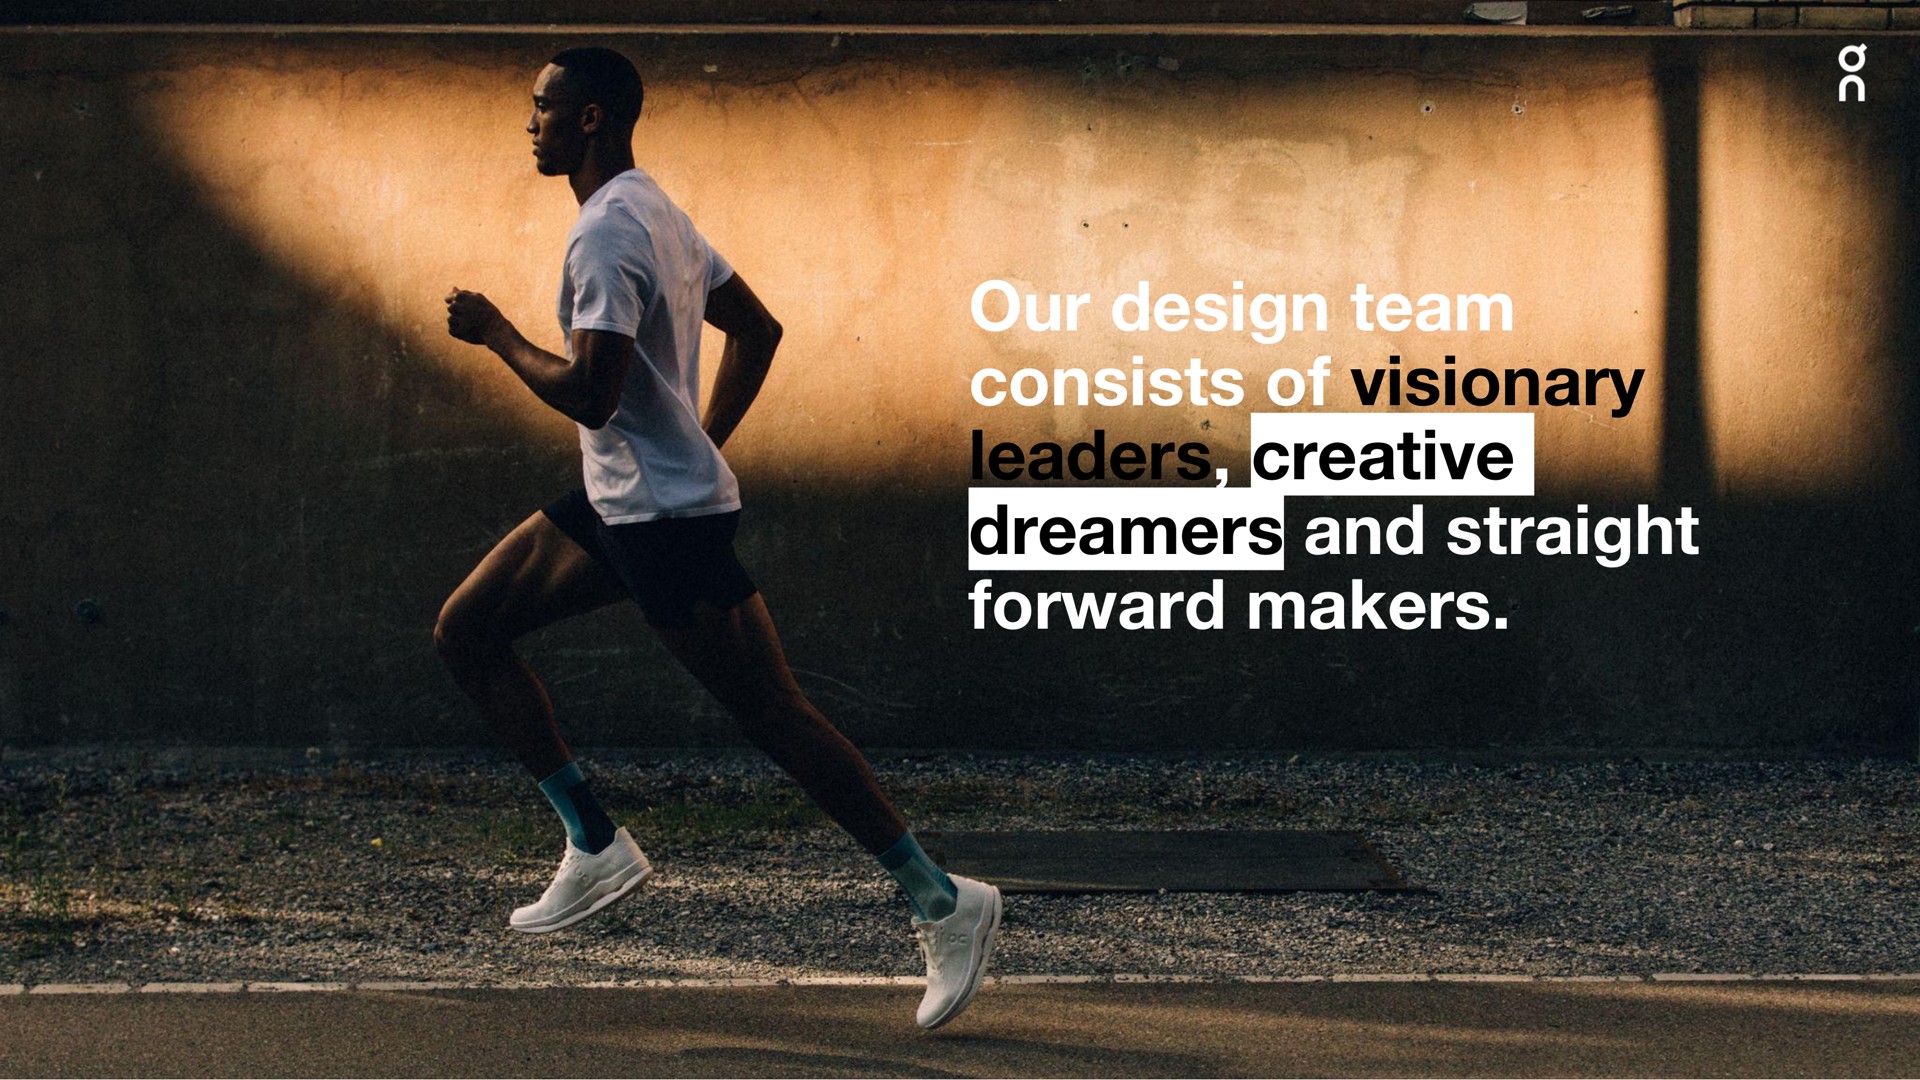 our design team consists of visionary leaders creative dreamers and straight forward makers lan ses | On Holding